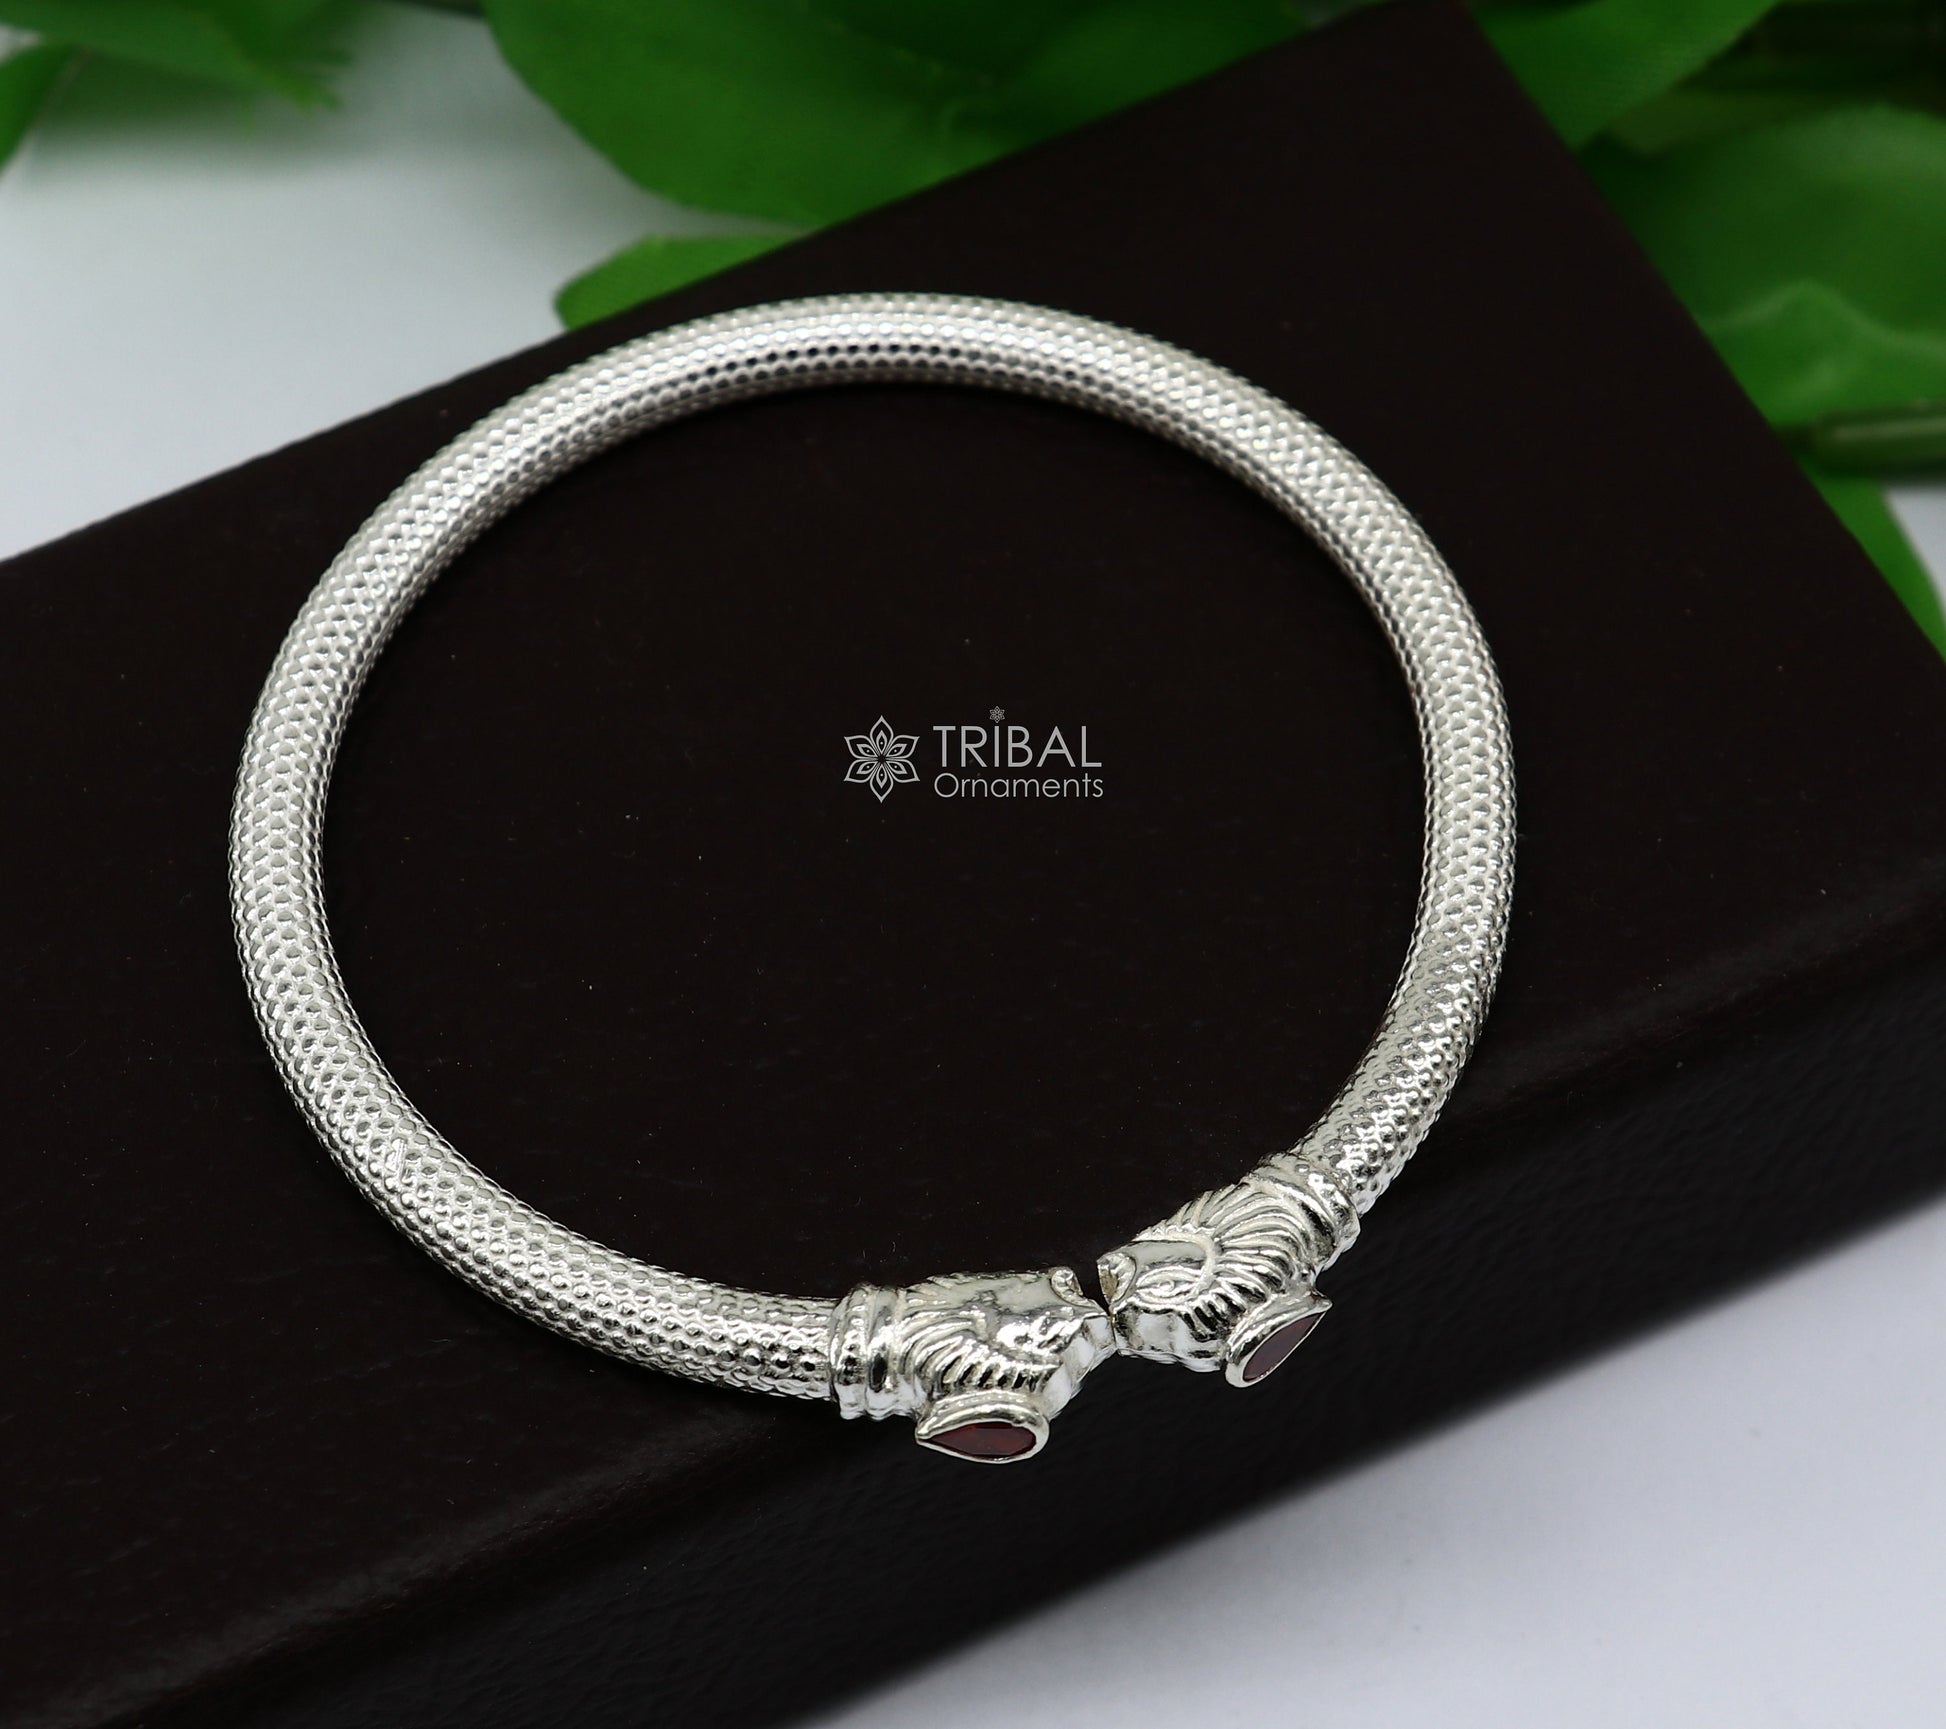 925 sterling silver handmade lion face design cultural trendy kada bracelet for men's and girl's, best delicate Light weight jewelry nsk663 - TRIBAL ORNAMENTS